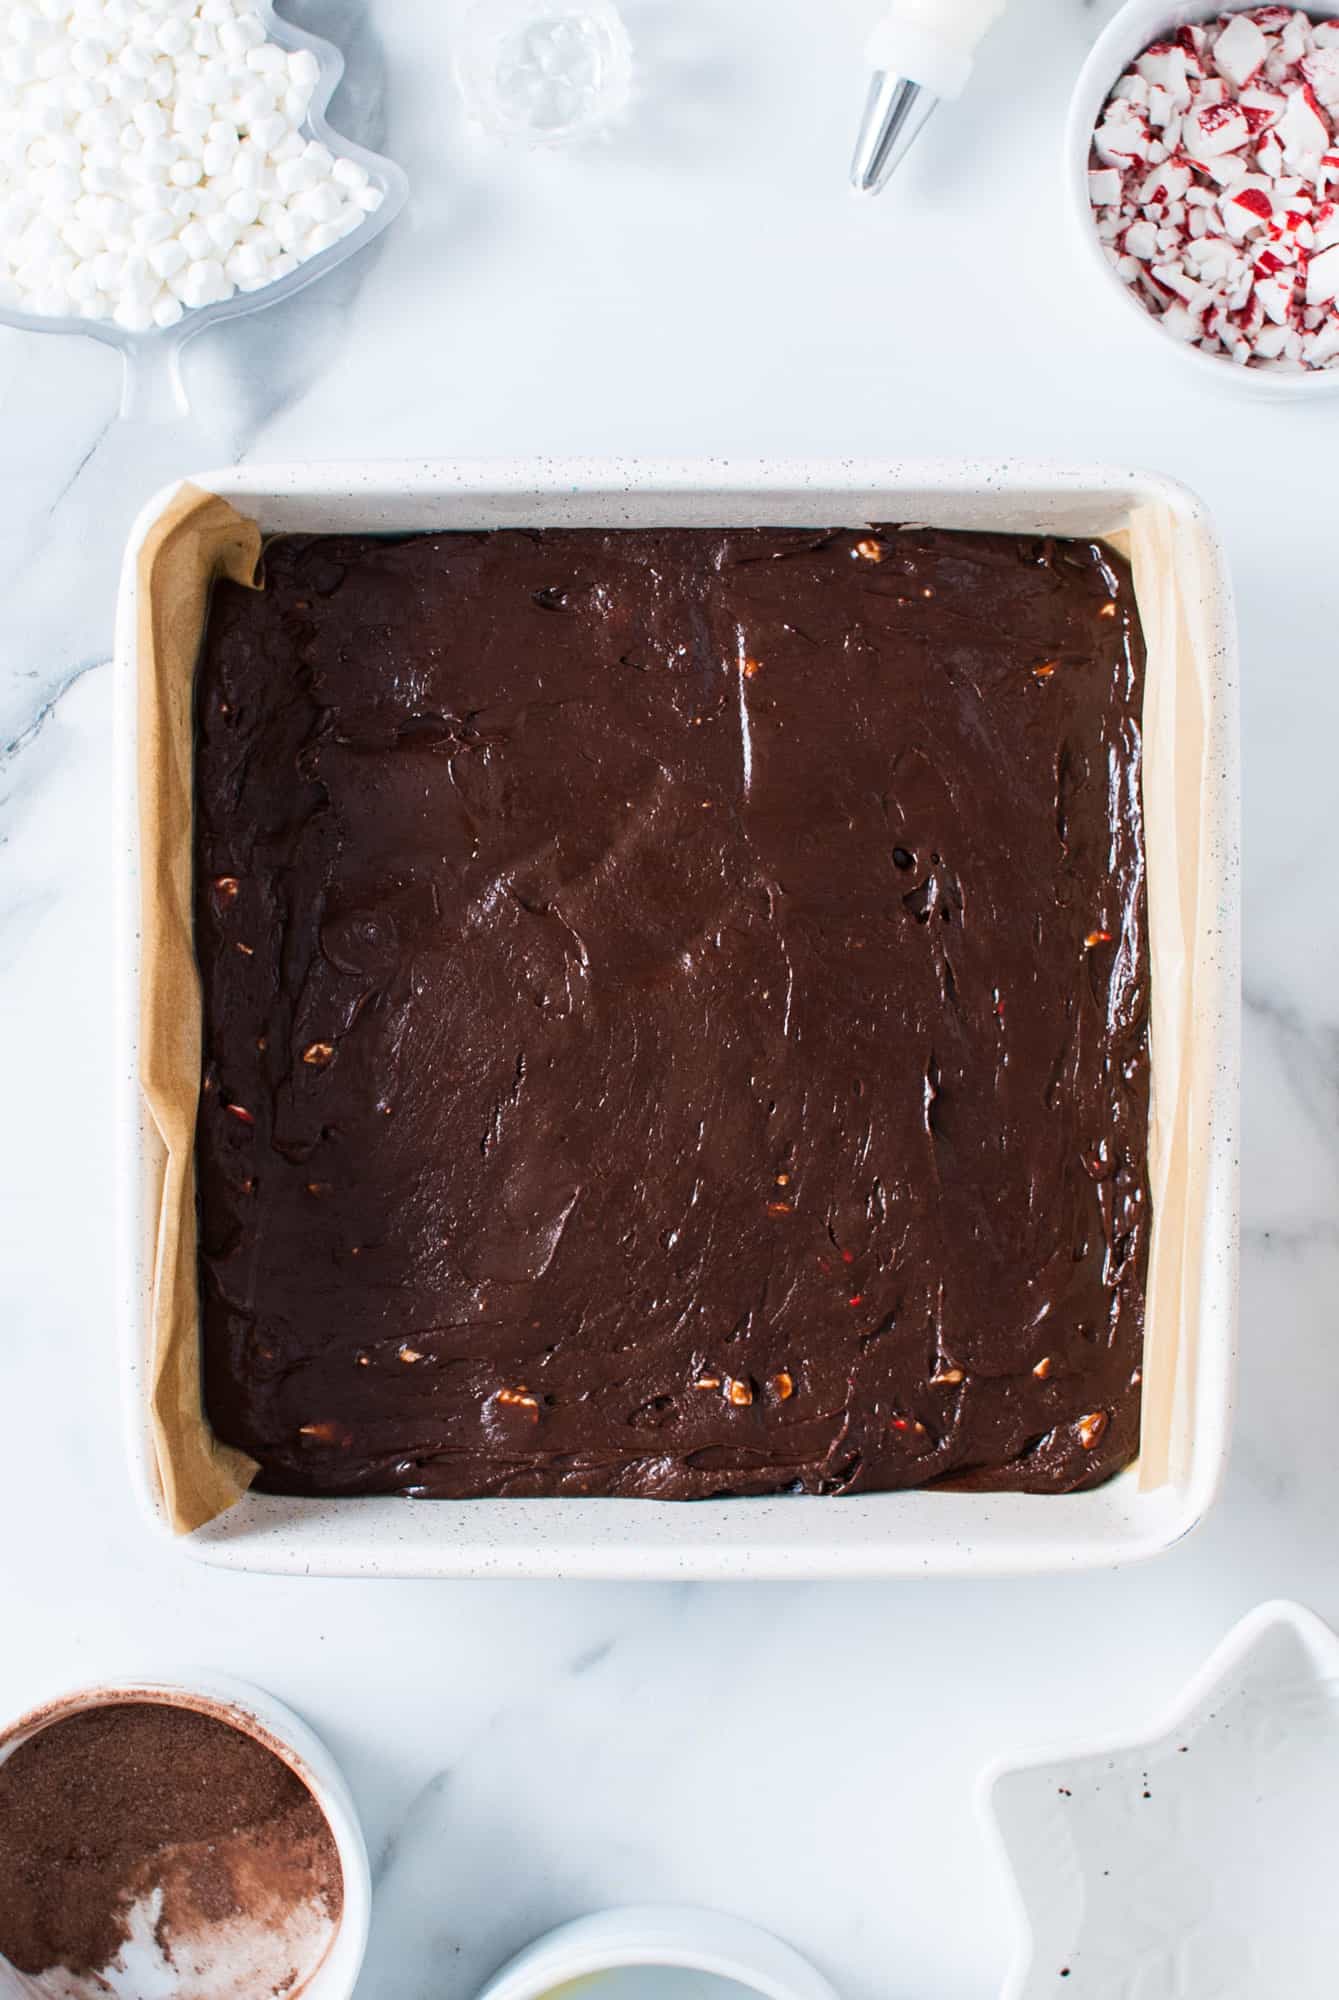 peppermint fudge pressed into a square baking pan that was lined with parchment paper